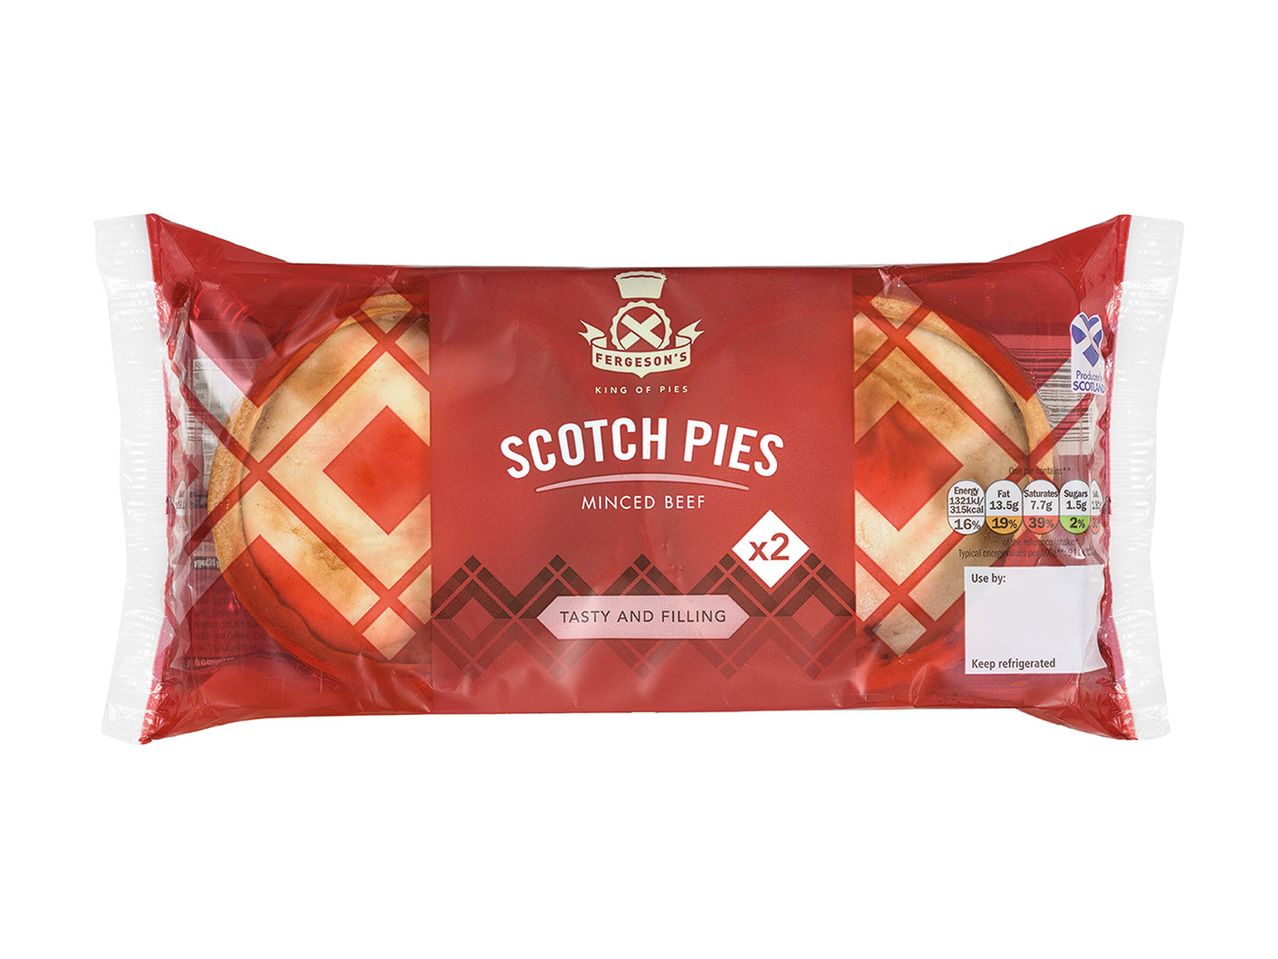 Go to full screen view: Fergeson's Scotch Pie 2 Pack - Image 1